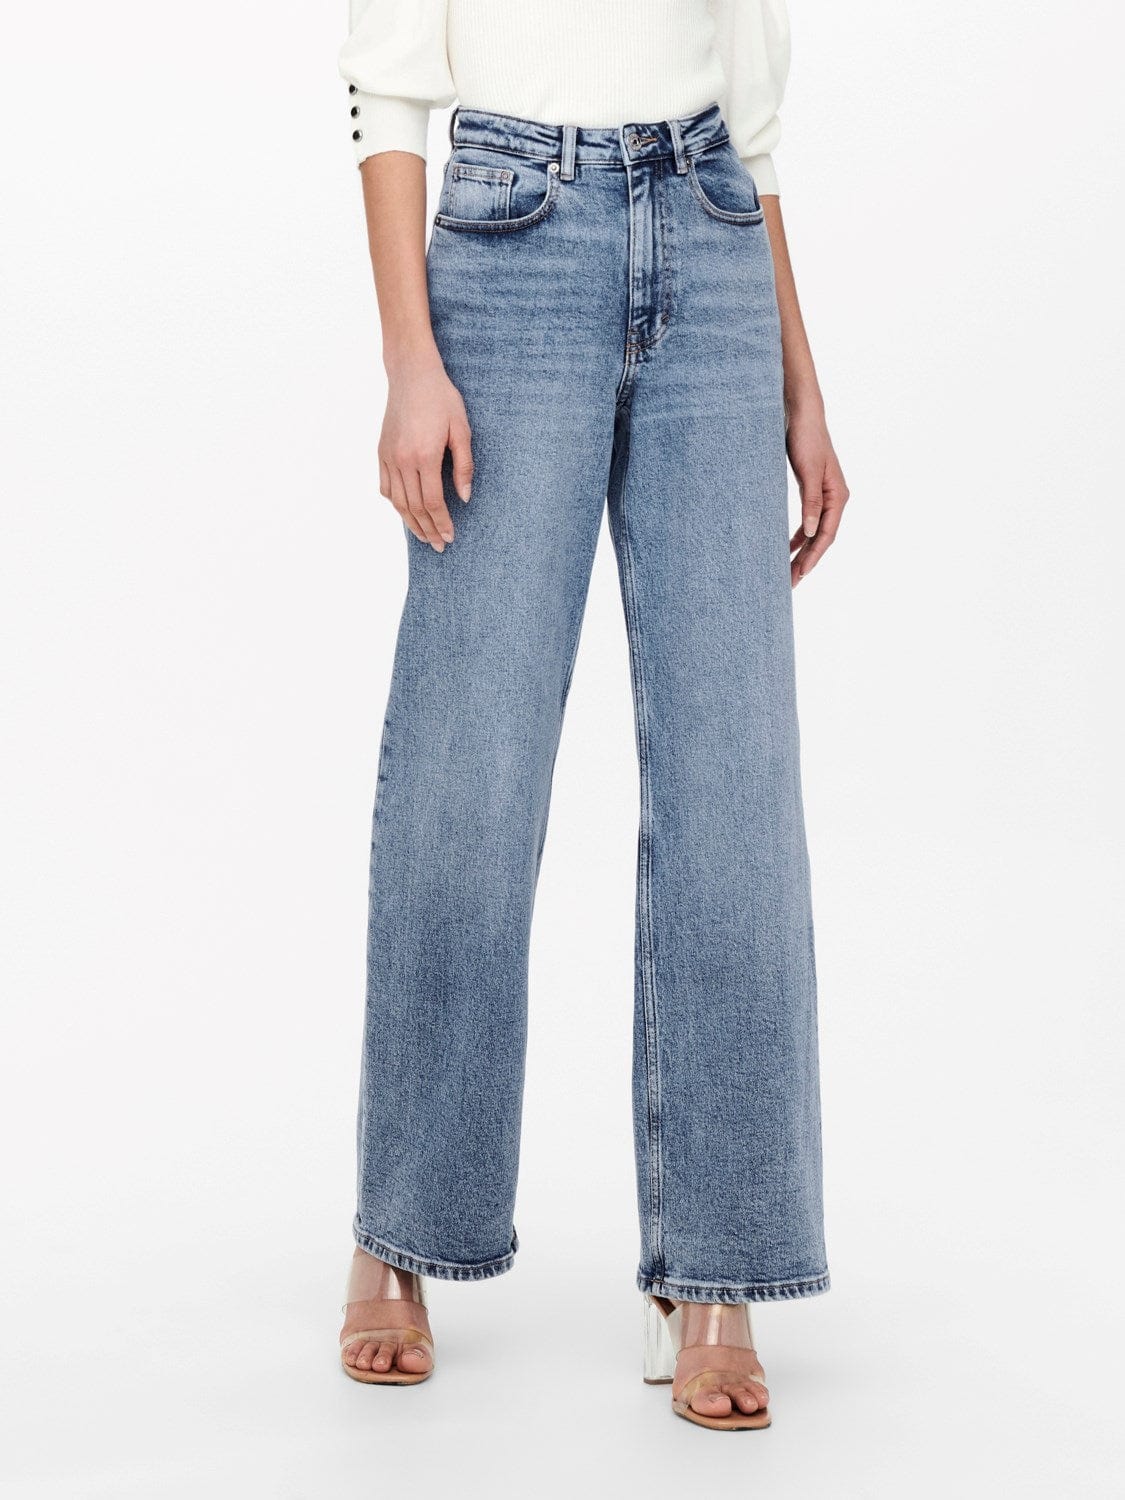 Only Underdele Denim Blue Wide Jeans - Juicy Only